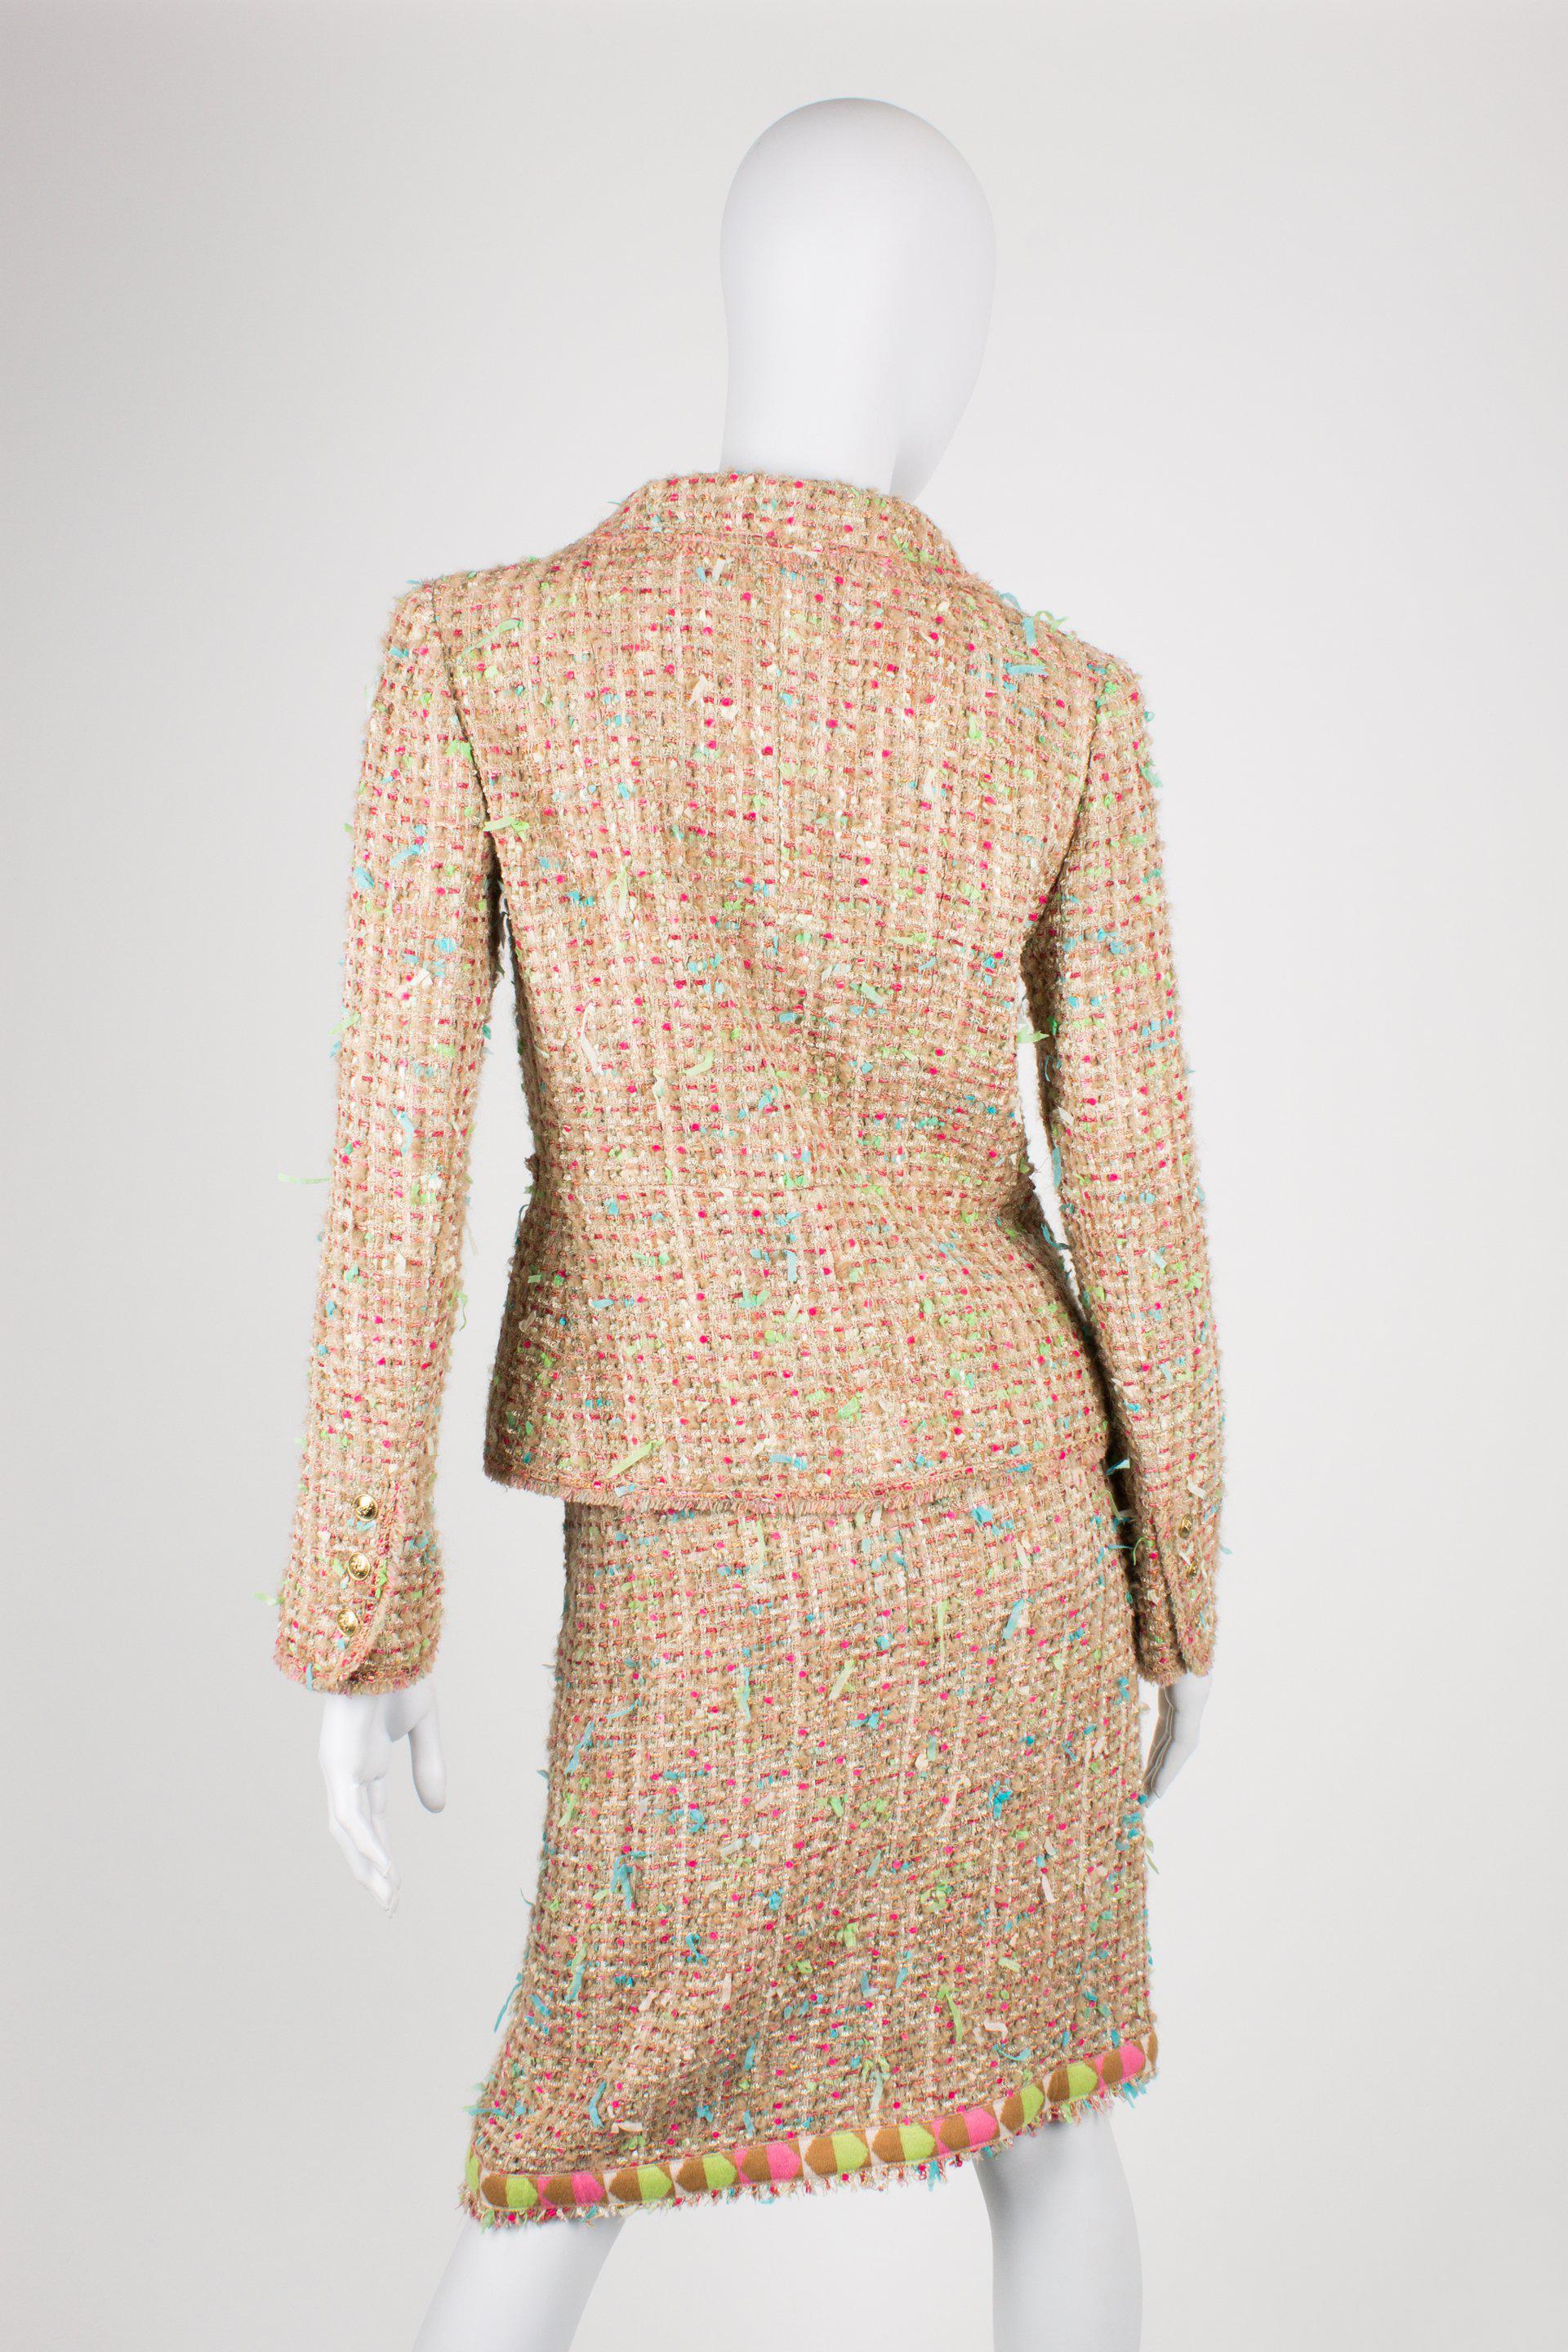 Chanel Suit 2-pcs Jacket & Skirt - beige/blue/pink/green In Excellent Condition For Sale In Baarn, NL